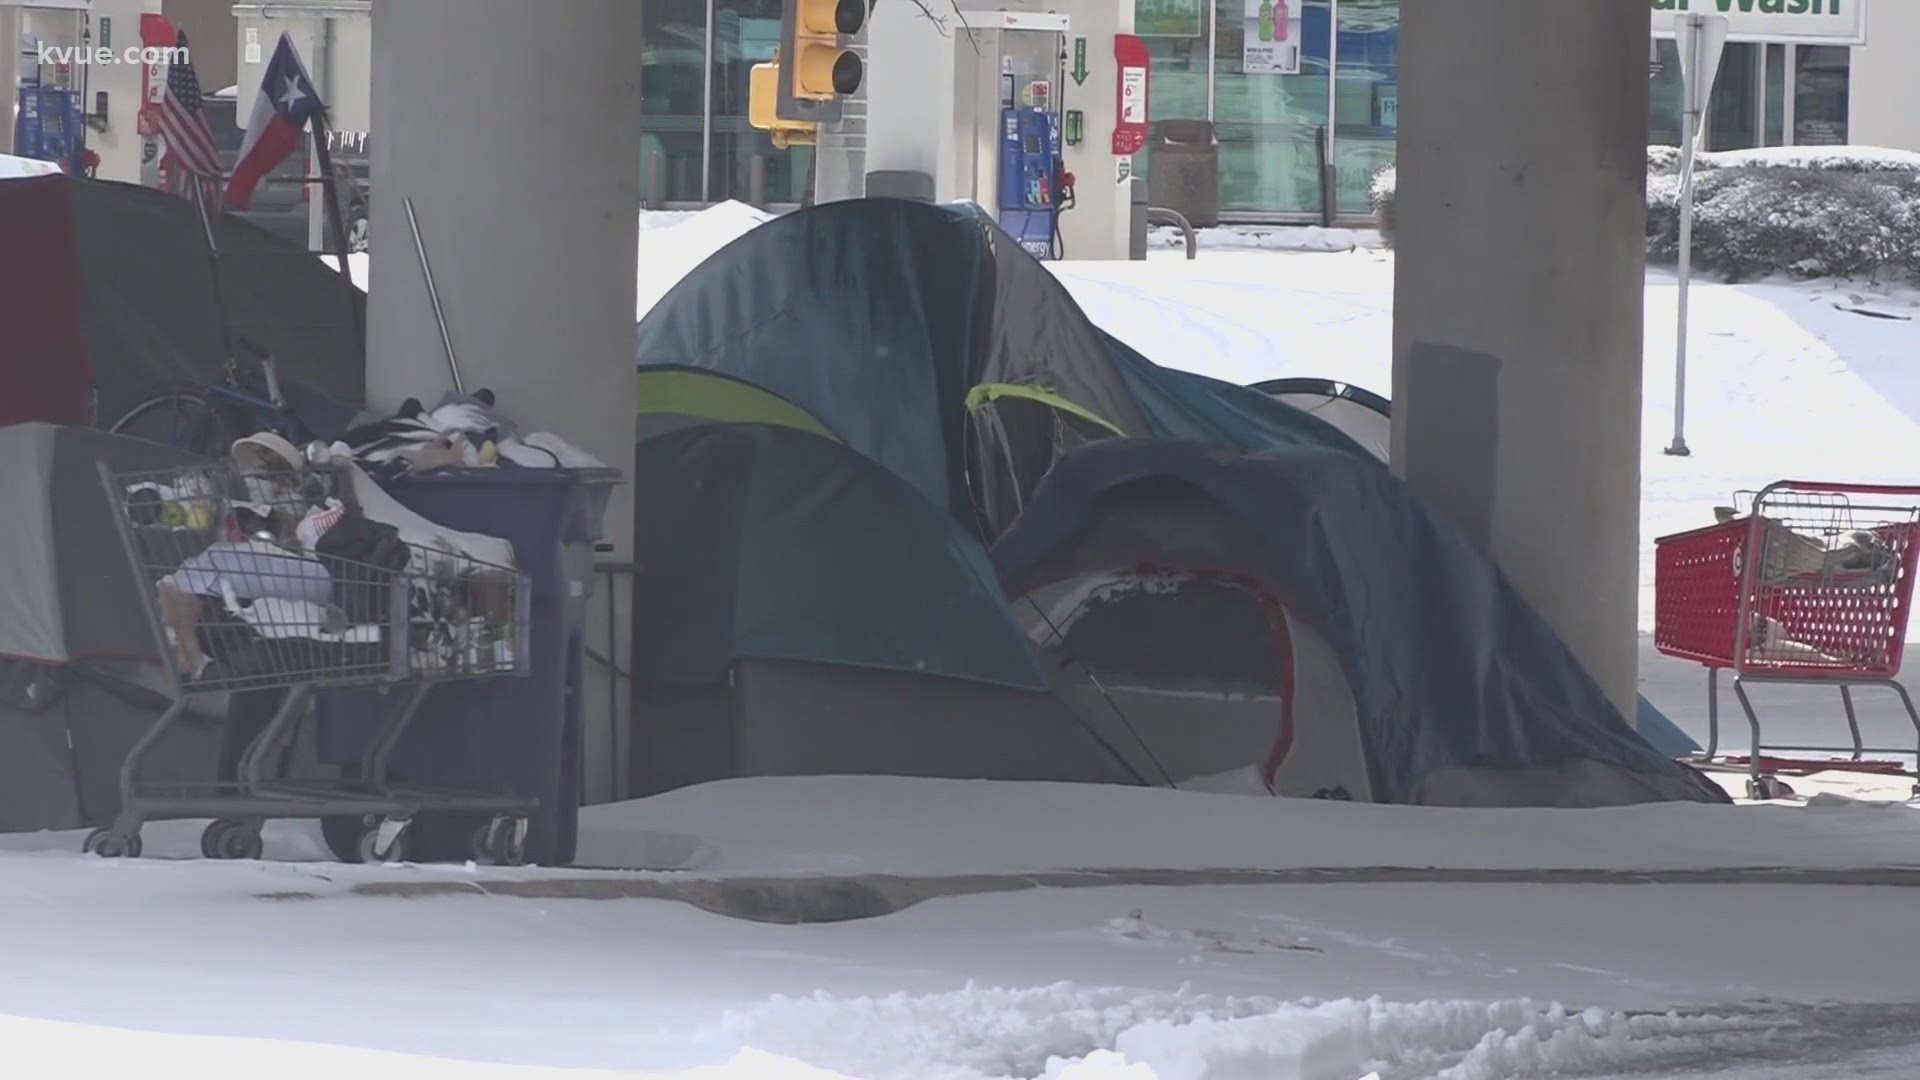 Our cold weather could become deadly for folks living on the streets. Groups are trying to help the homeless avoid the dangerous conditions.